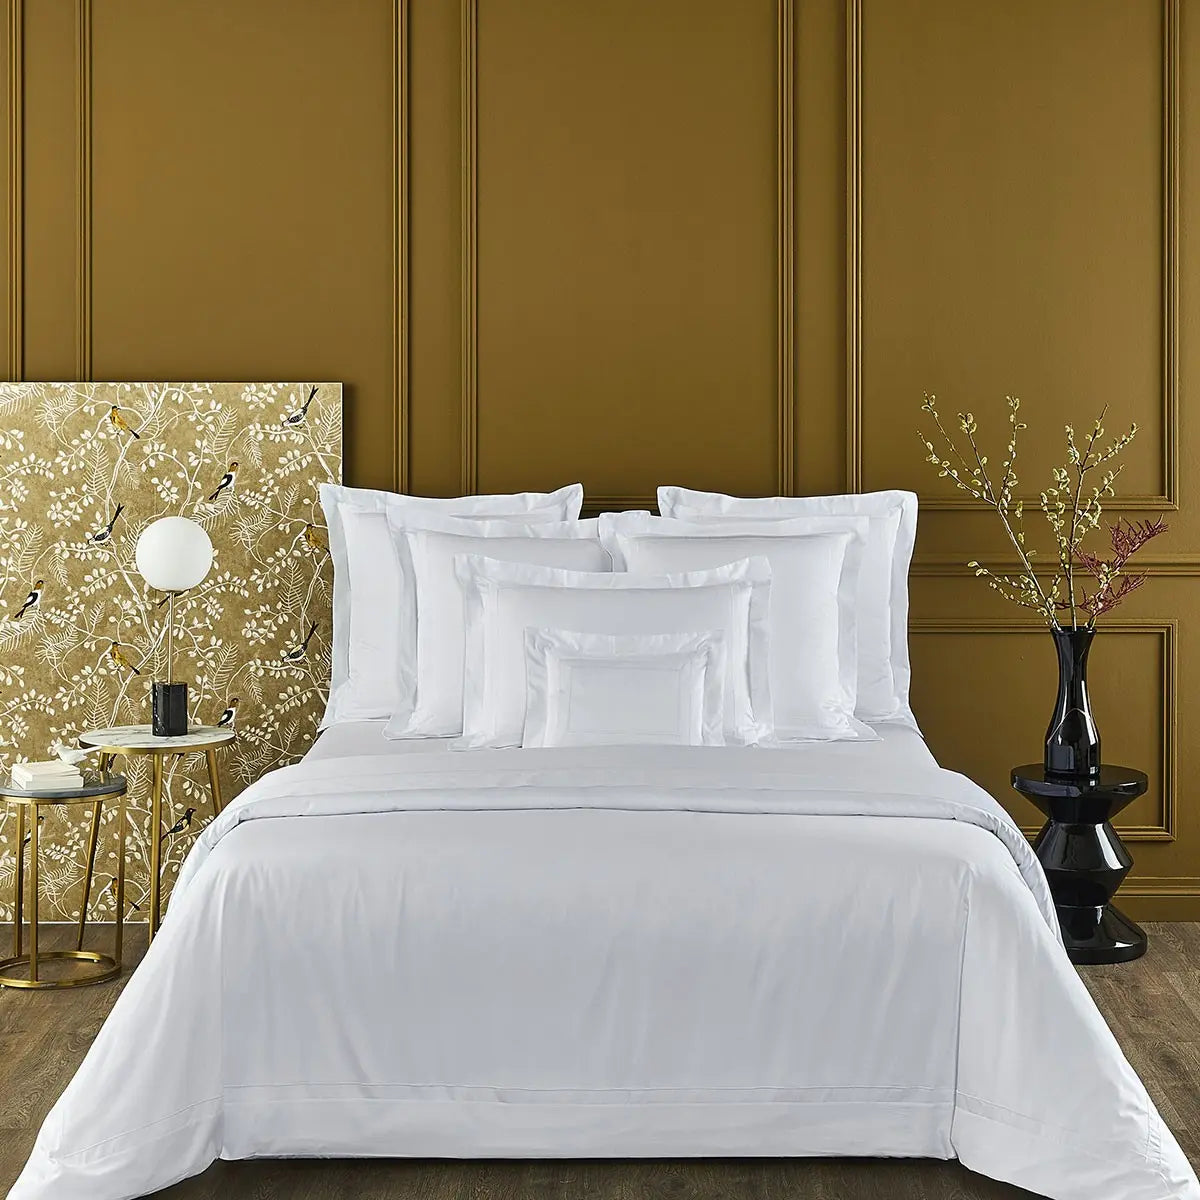 Yves Delorme Lutece Duvet Cover - Blanc on a bed